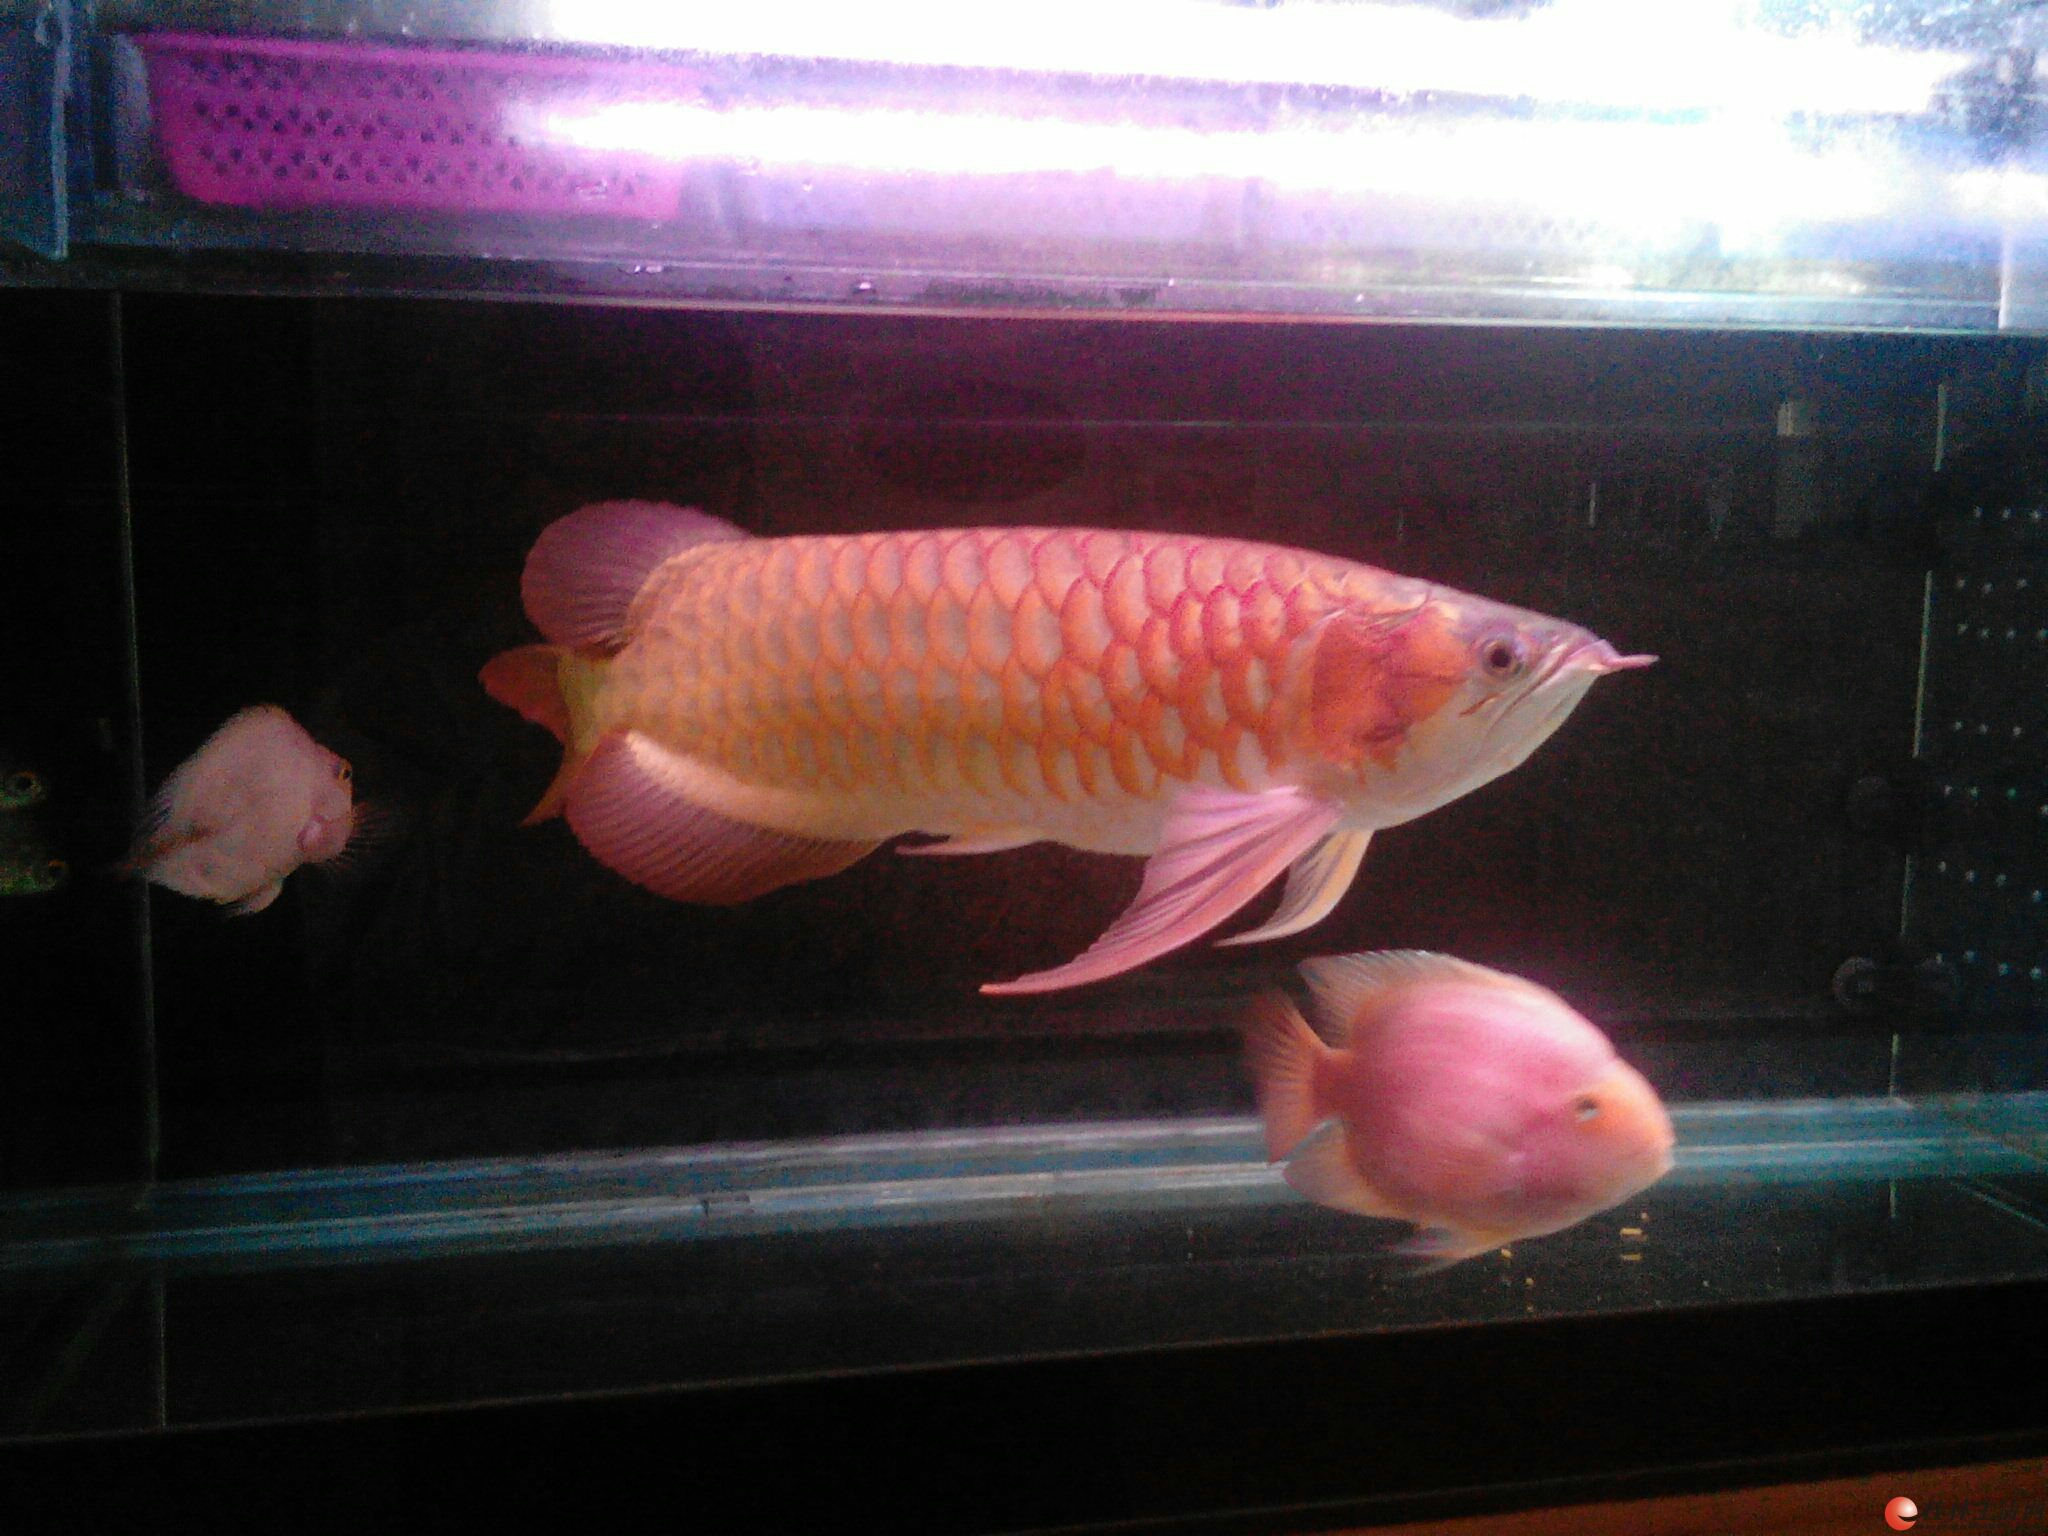 Have you put the right salt for keeping arowana？